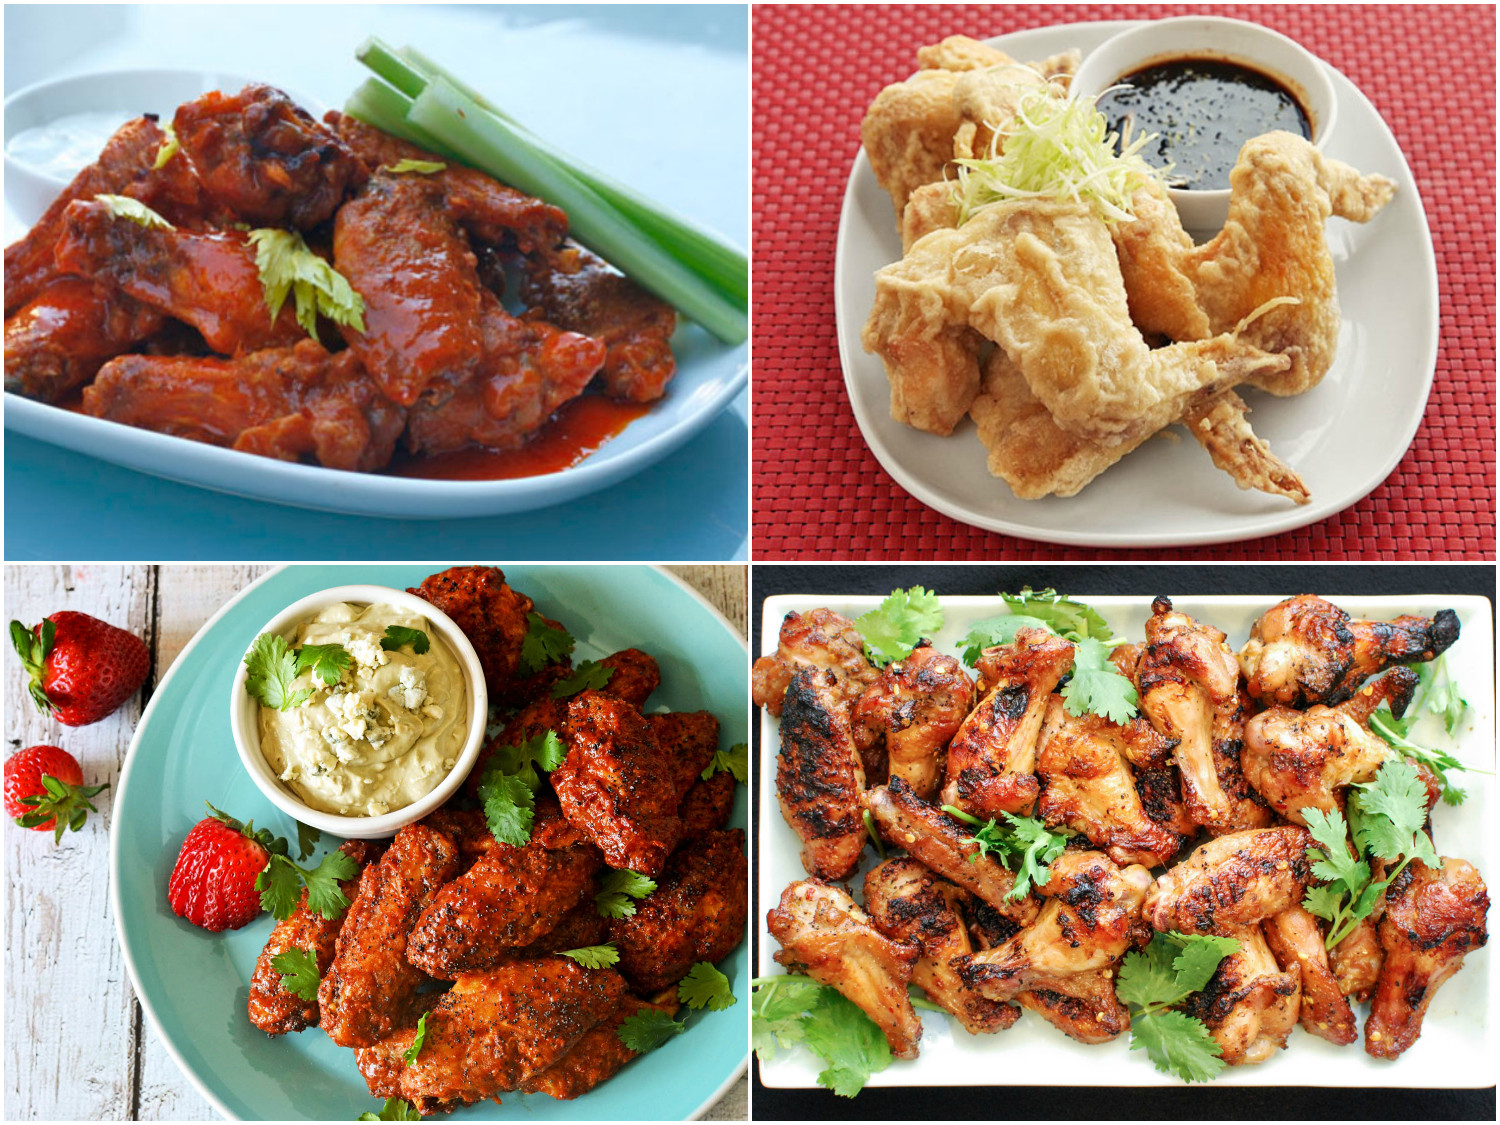 Super Bowl Wing Recipes
 15 Super Bowl Wing Recipes to Make Your Game Day Fly